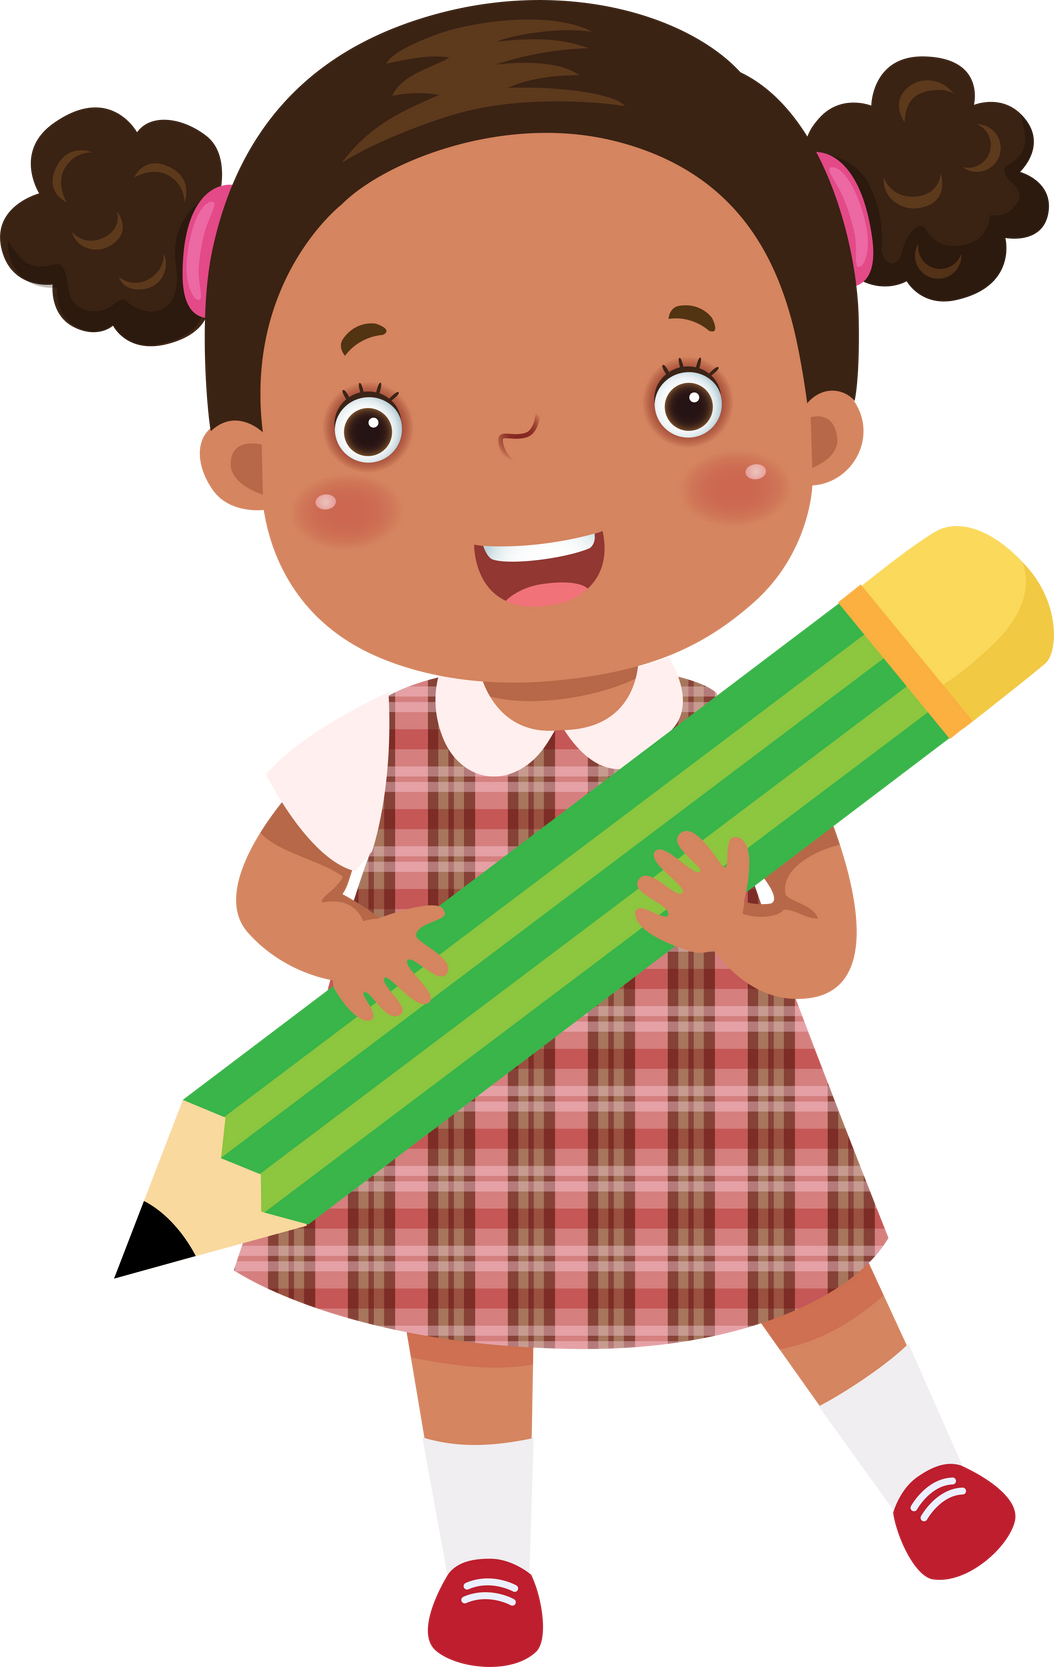 Girl Student Holding a Pencil